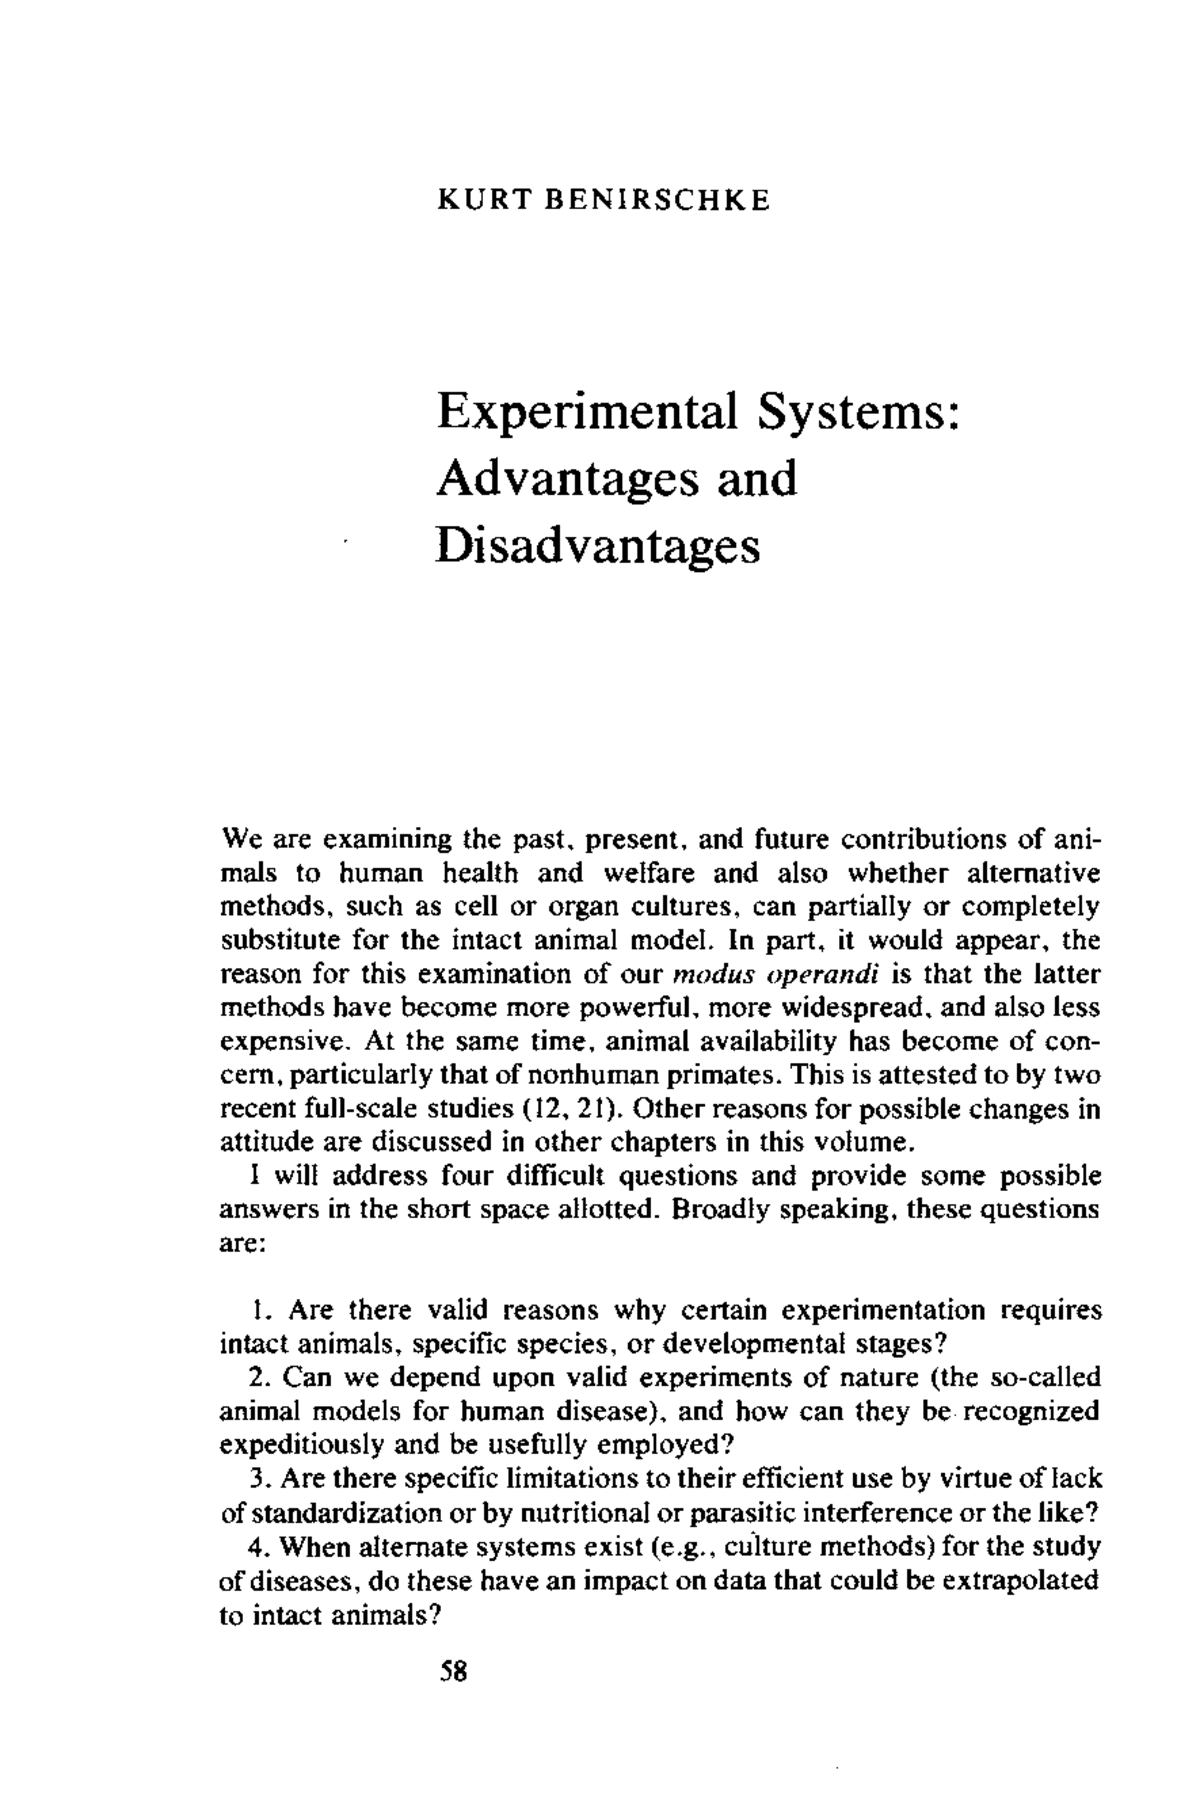 EXPERIMENTAL SYSTEMS: ADVANTAGES AND DISADVANTAGES | Future of Animals,  Cells, Models, and Systems in Research, Development, Education, and Testing:  Proceedings of a Symposium |The National Academies Press